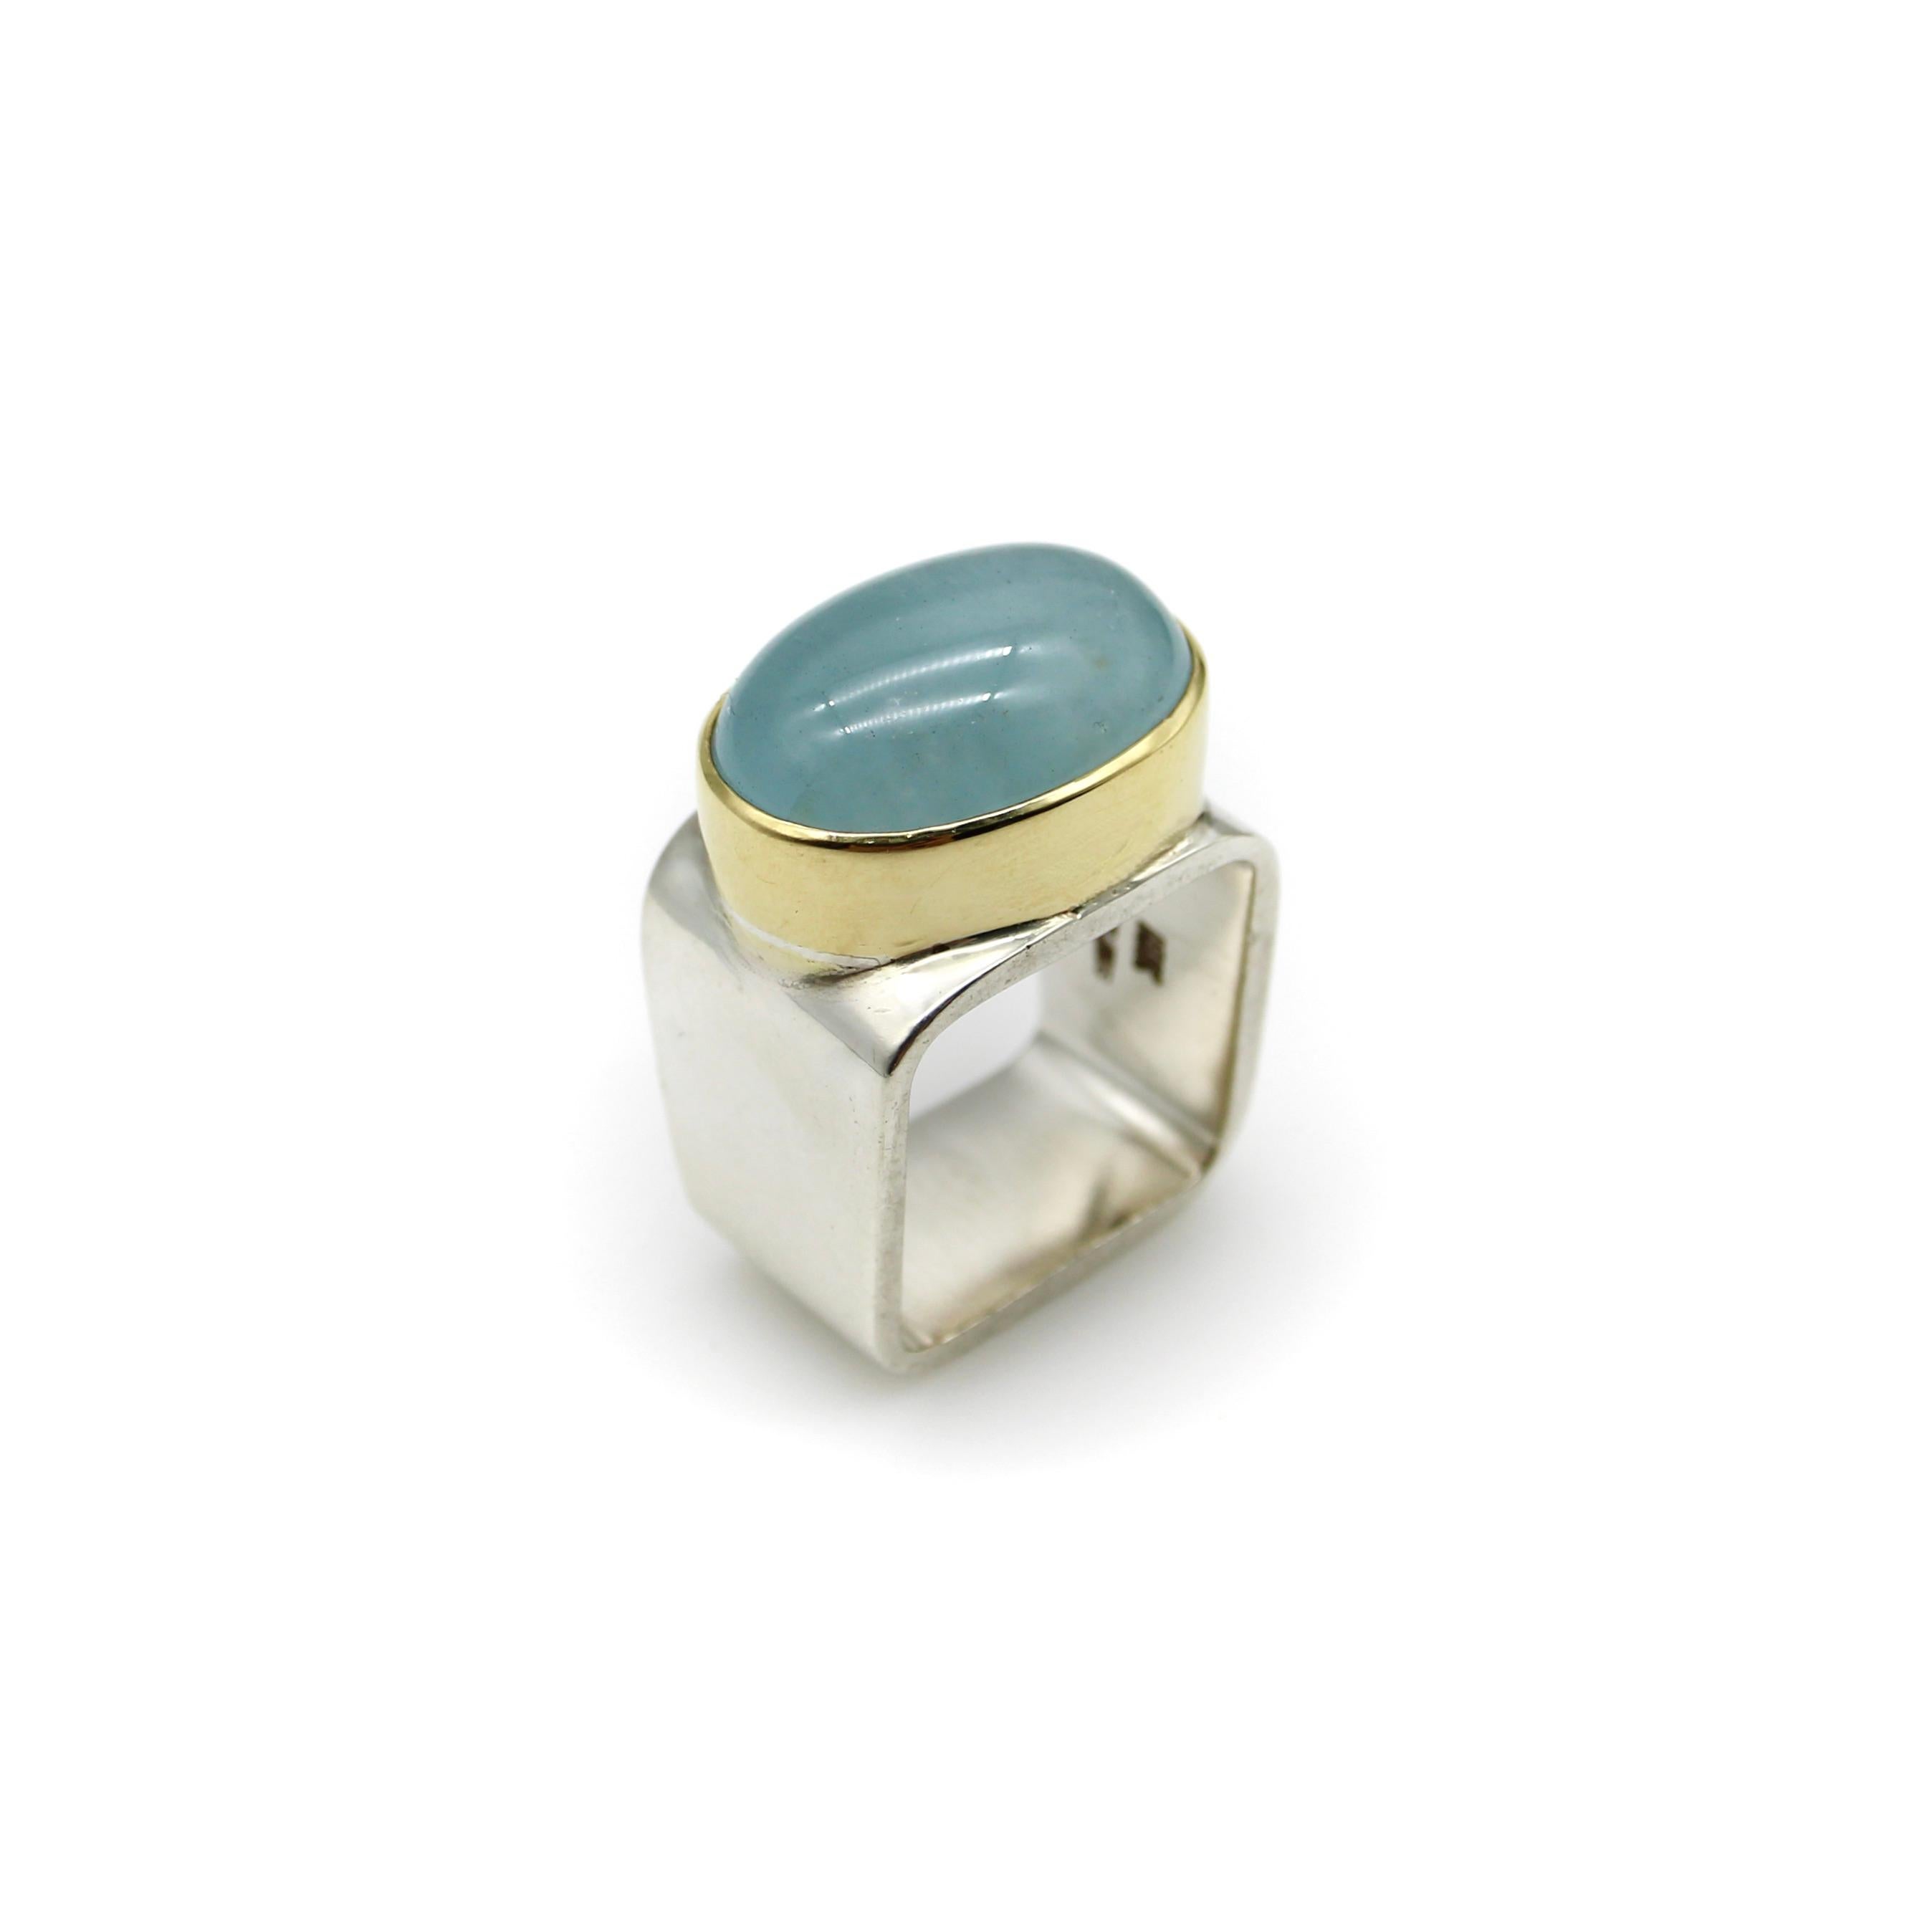 Sleek and sculptural, this 18k gold and sterling silver ring is a contemporary piece with a modern feel. Designed by Gabriel Ofiesh, the ring features an oval aquamarine cabochon in an 18k gold bezel, set into a square sterling silver band. The